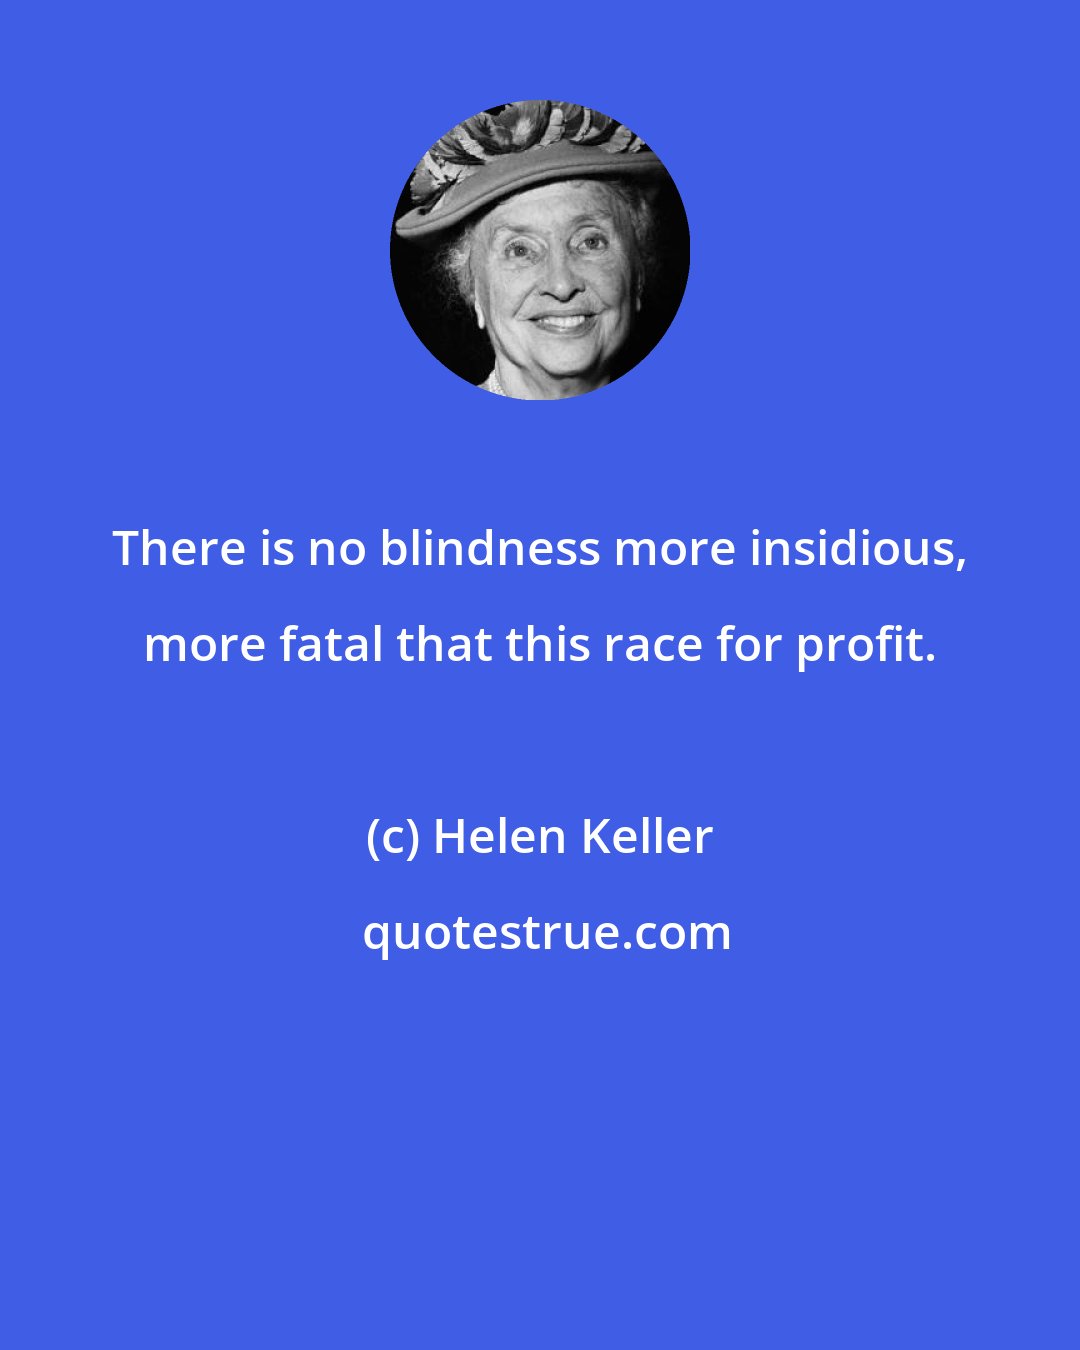 Helen Keller: There is no blindness more insidious, more fatal that this race for profit.